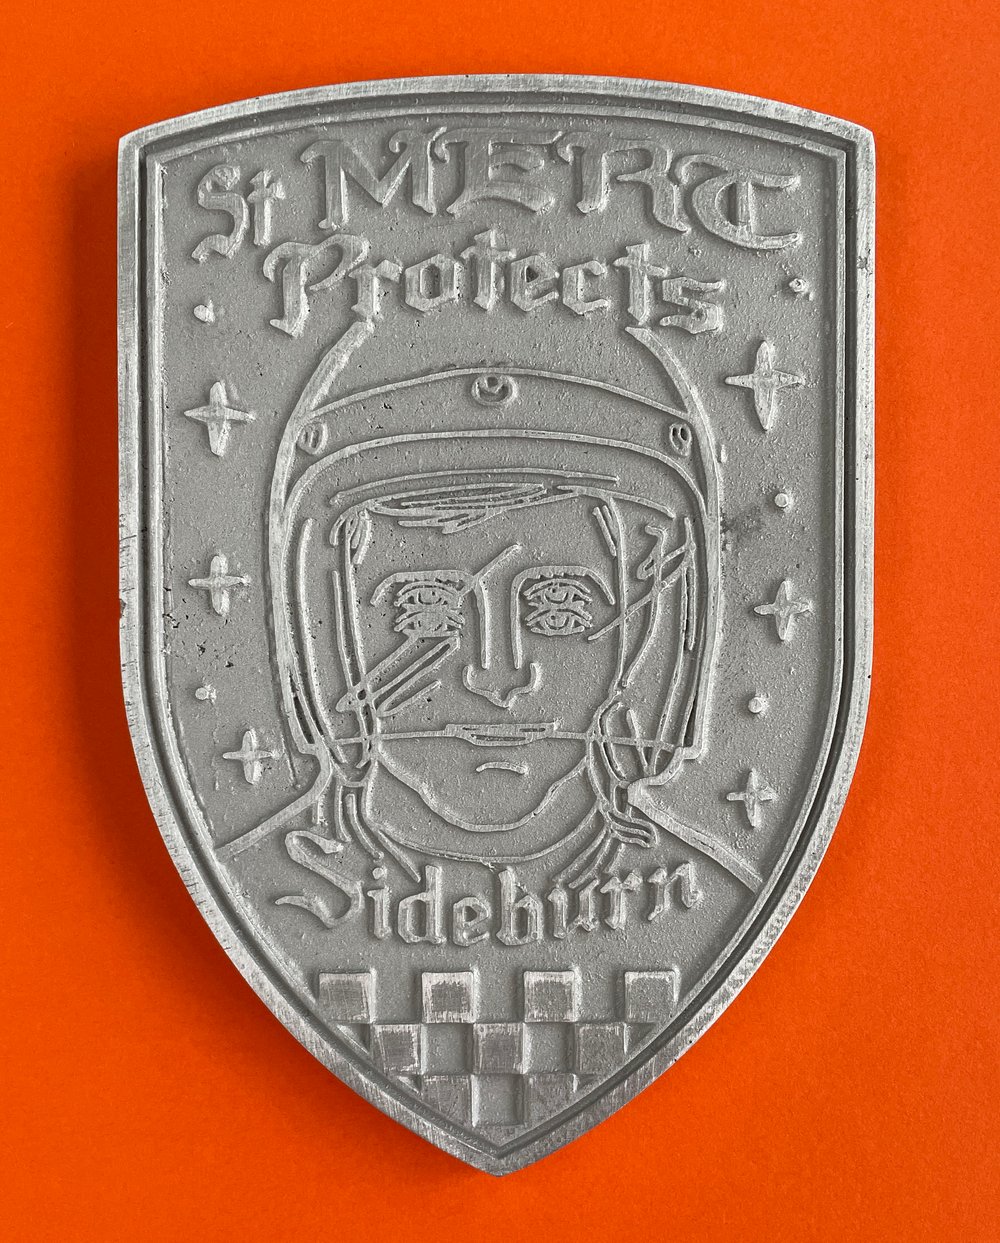 Image of St Mert Protects Shield